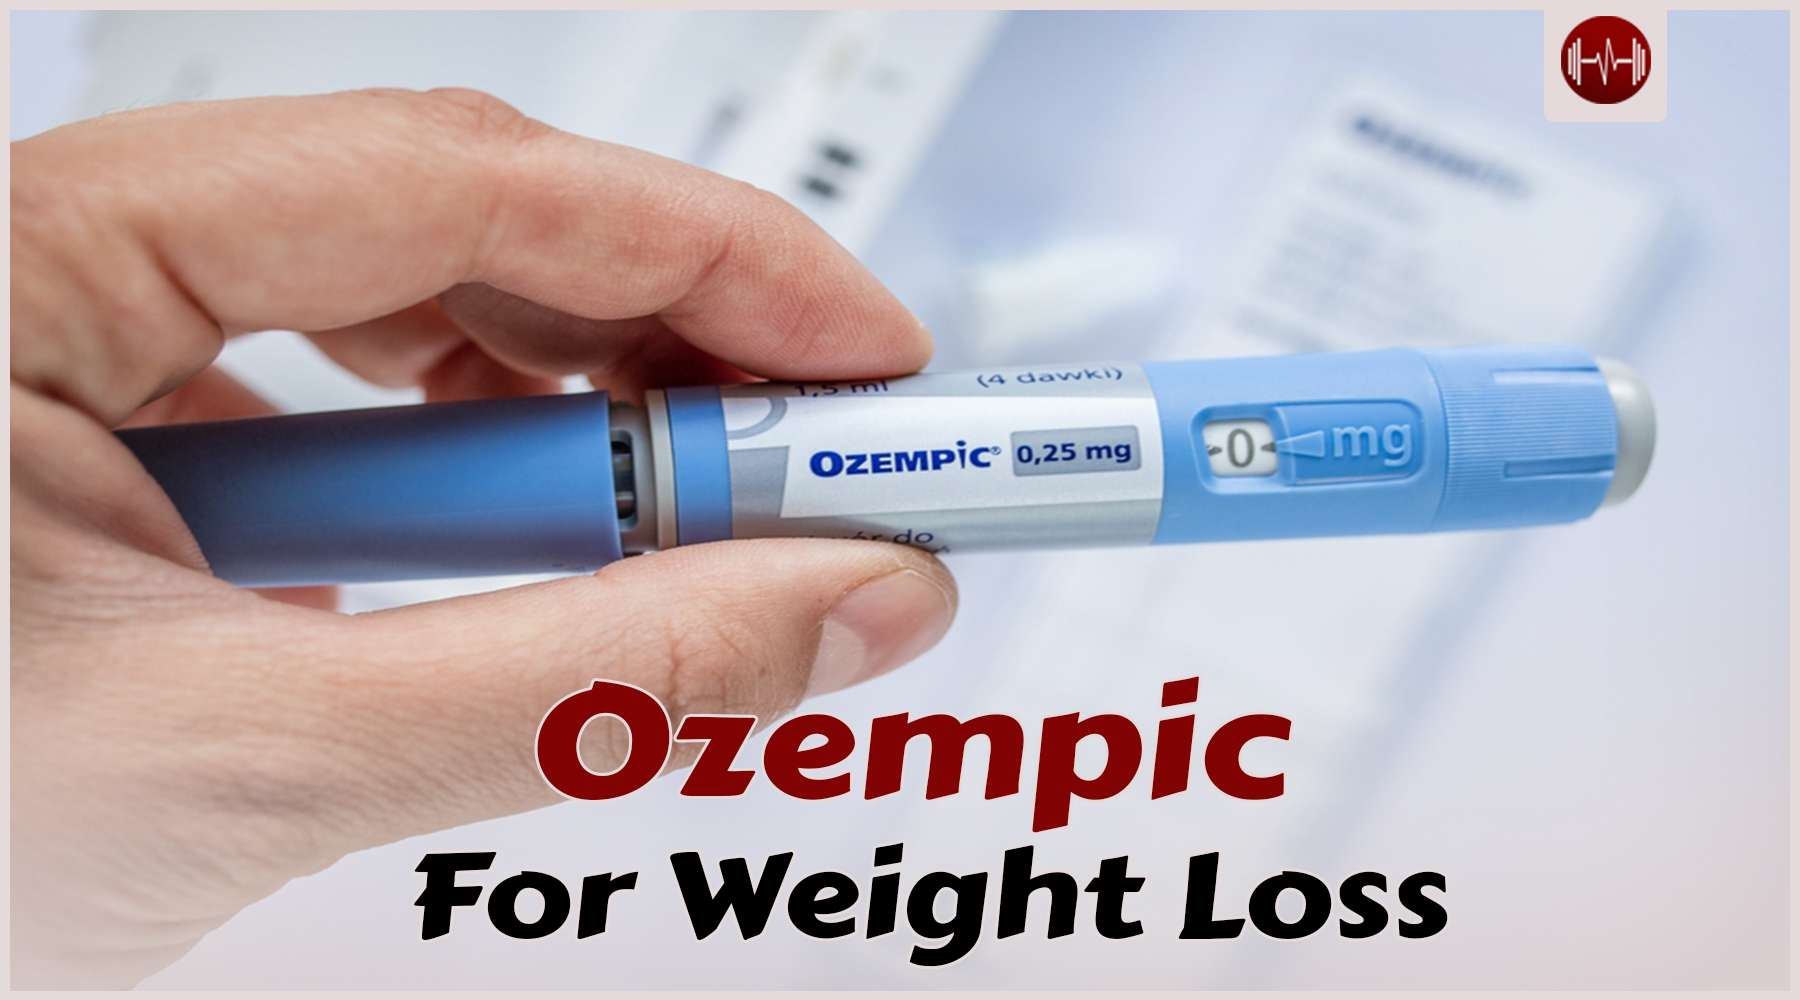 How To Use Ozempic Injection For Weight Loss Aestheticbeats